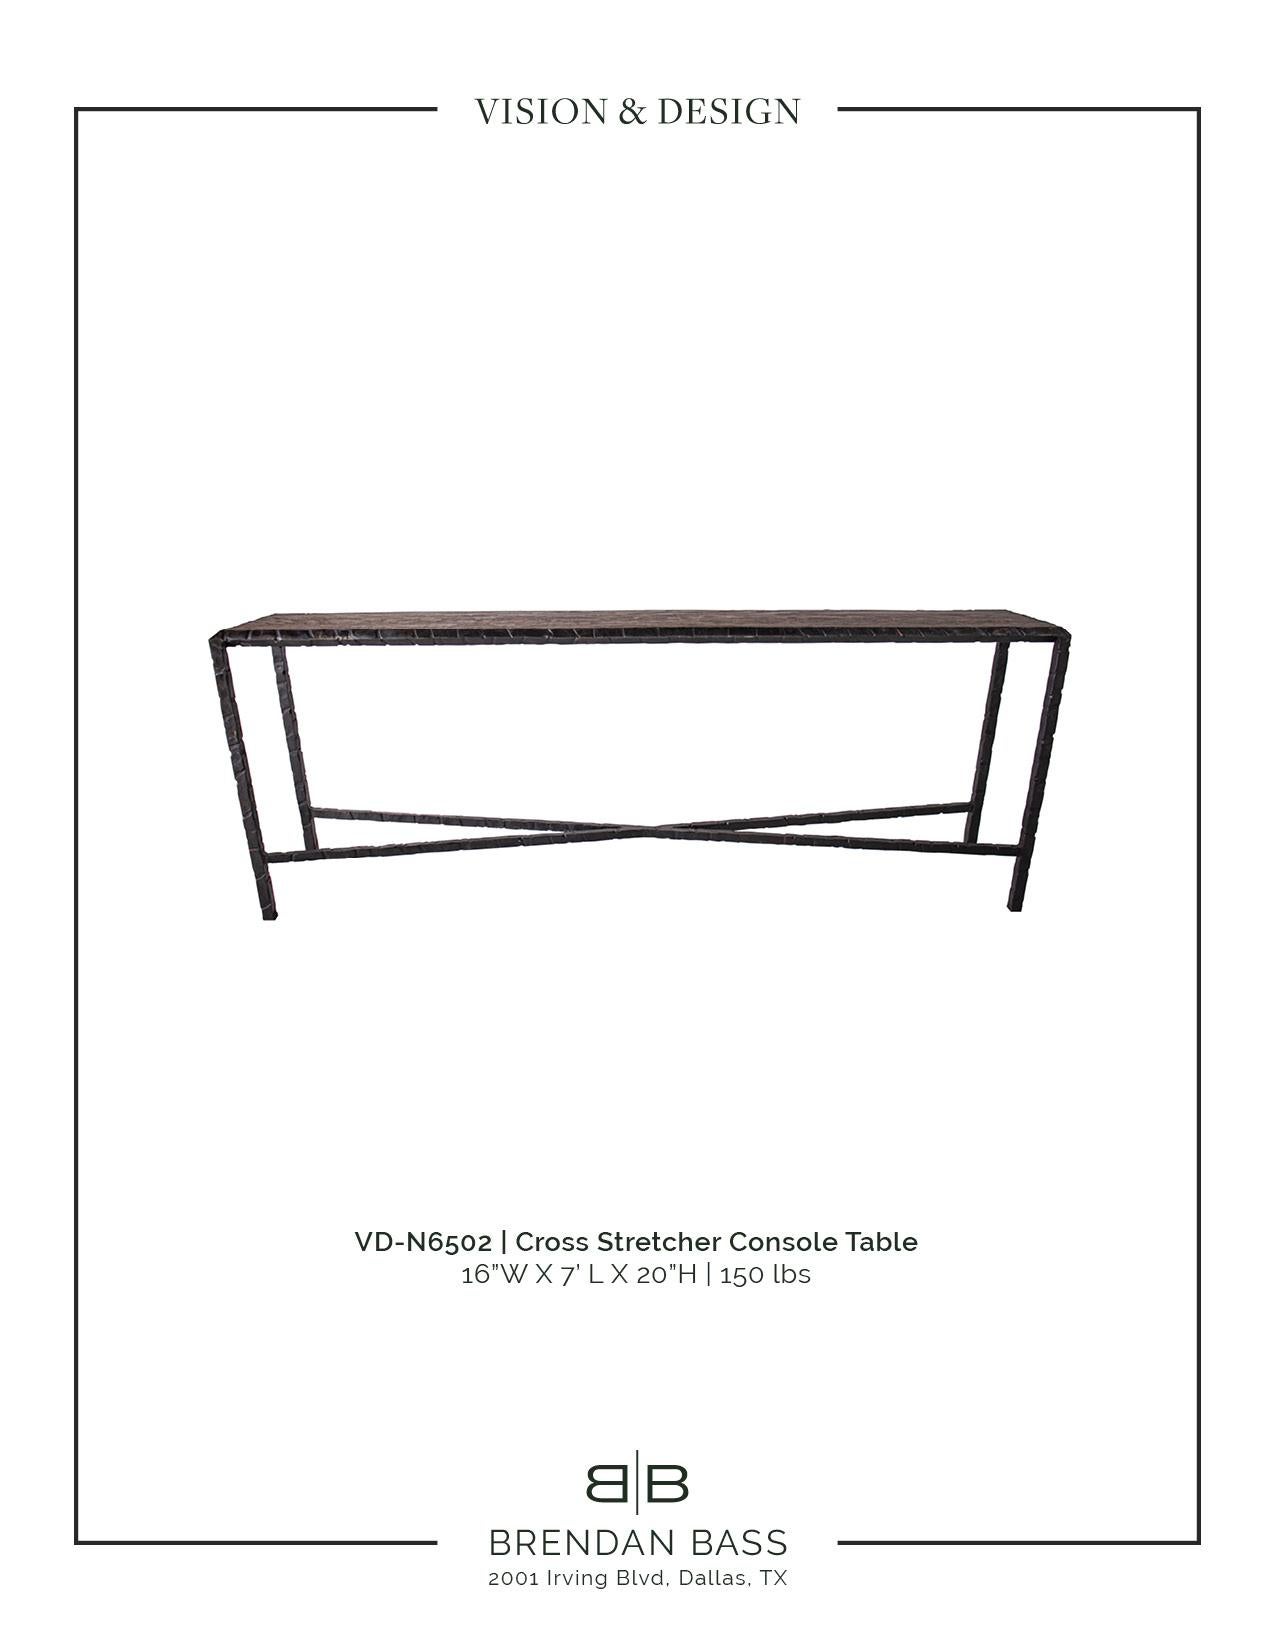 Contemporary Cross Stretcher Console Table For Sale